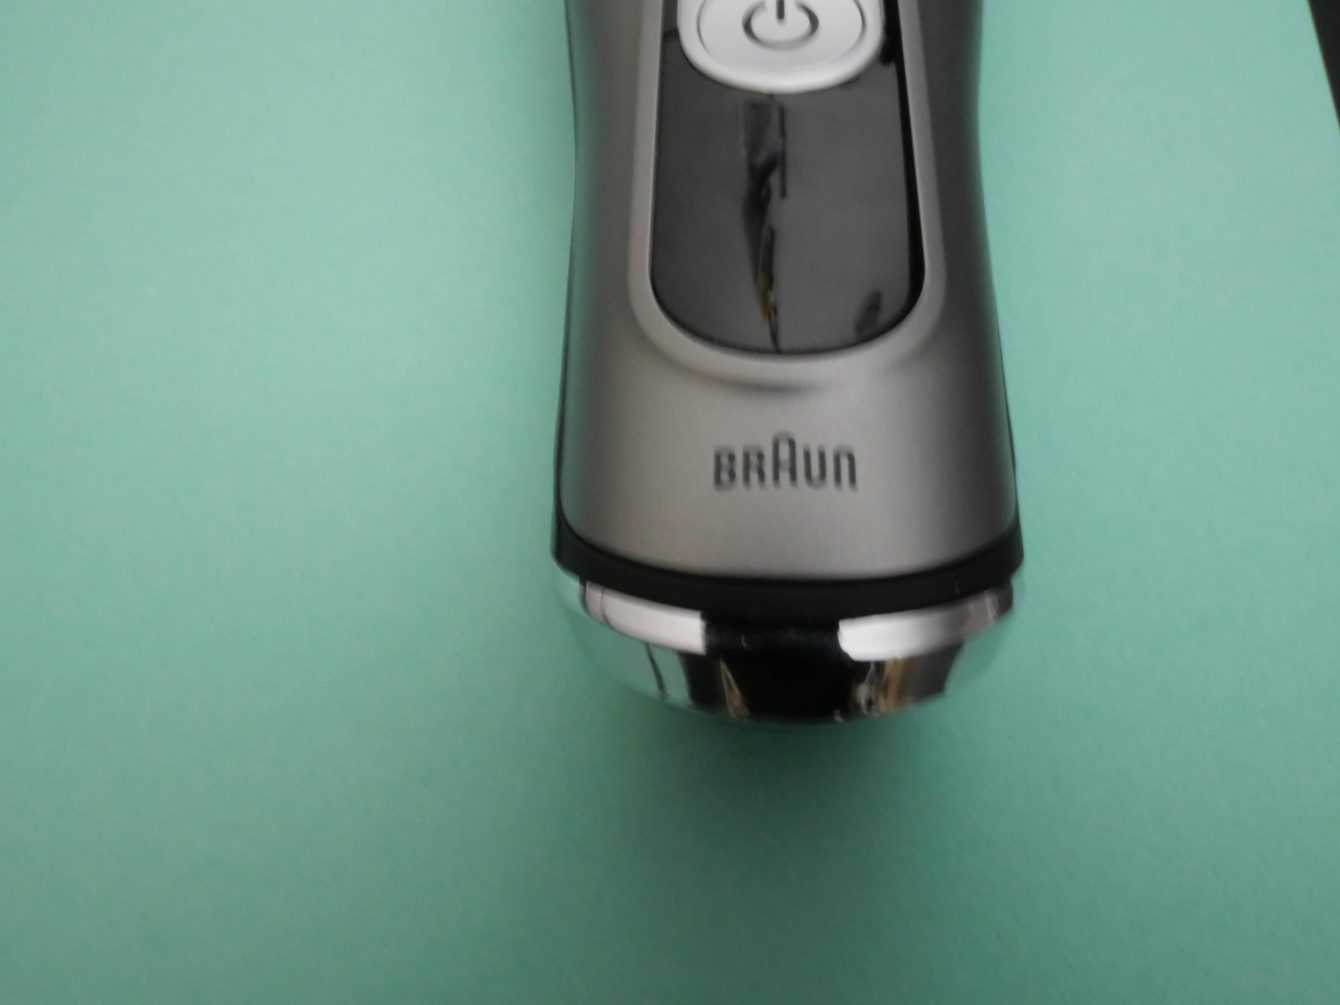 Braun Series 9 razor review: a flawless shave